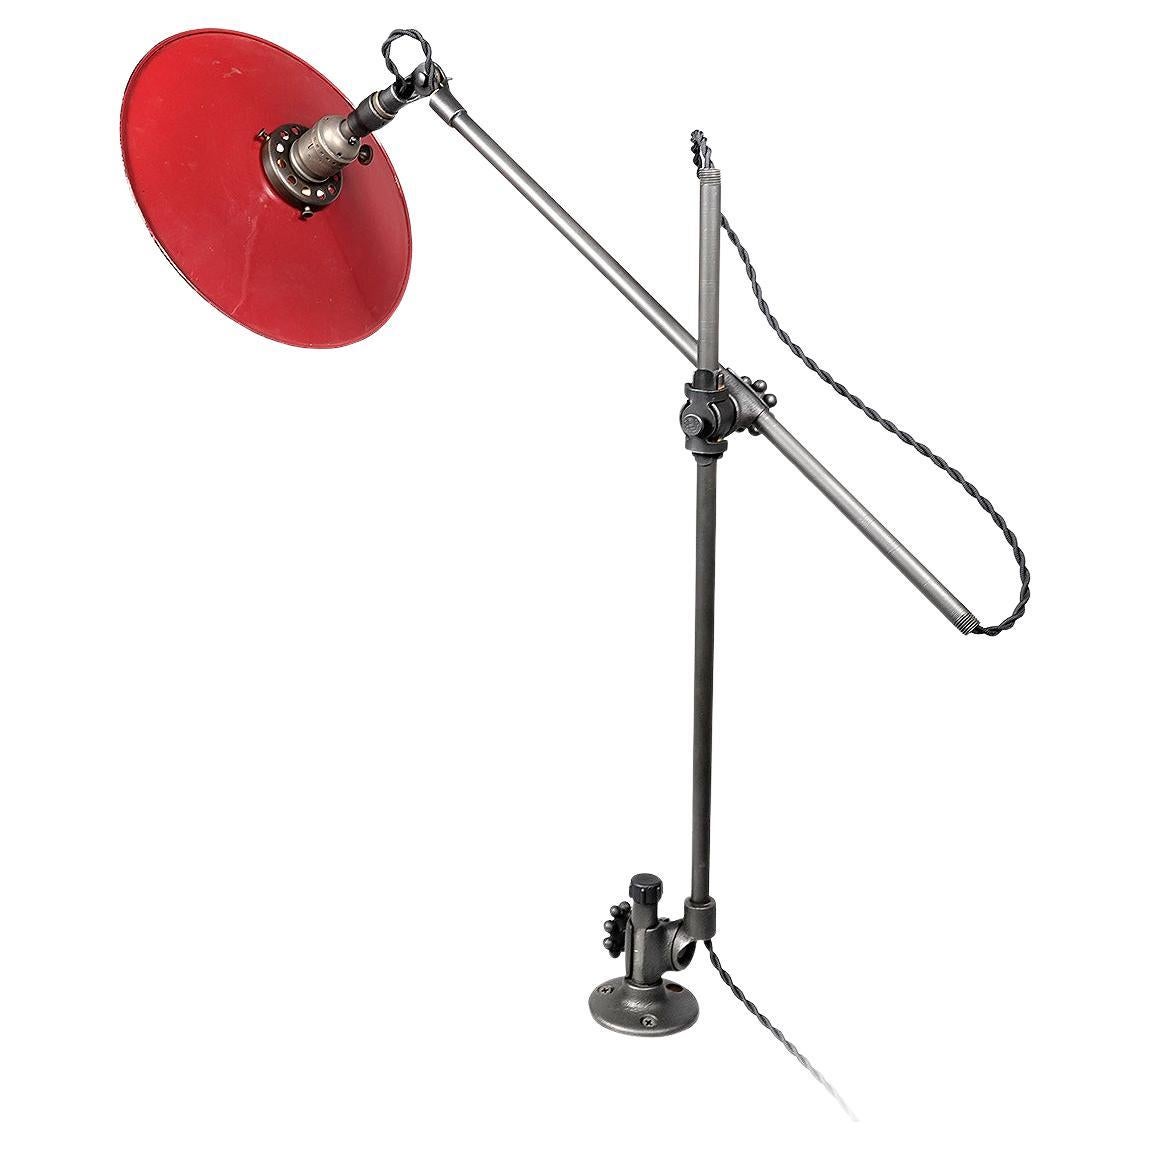 Original O. C. White Articulated Wall or Desk Lamp, Red Shade